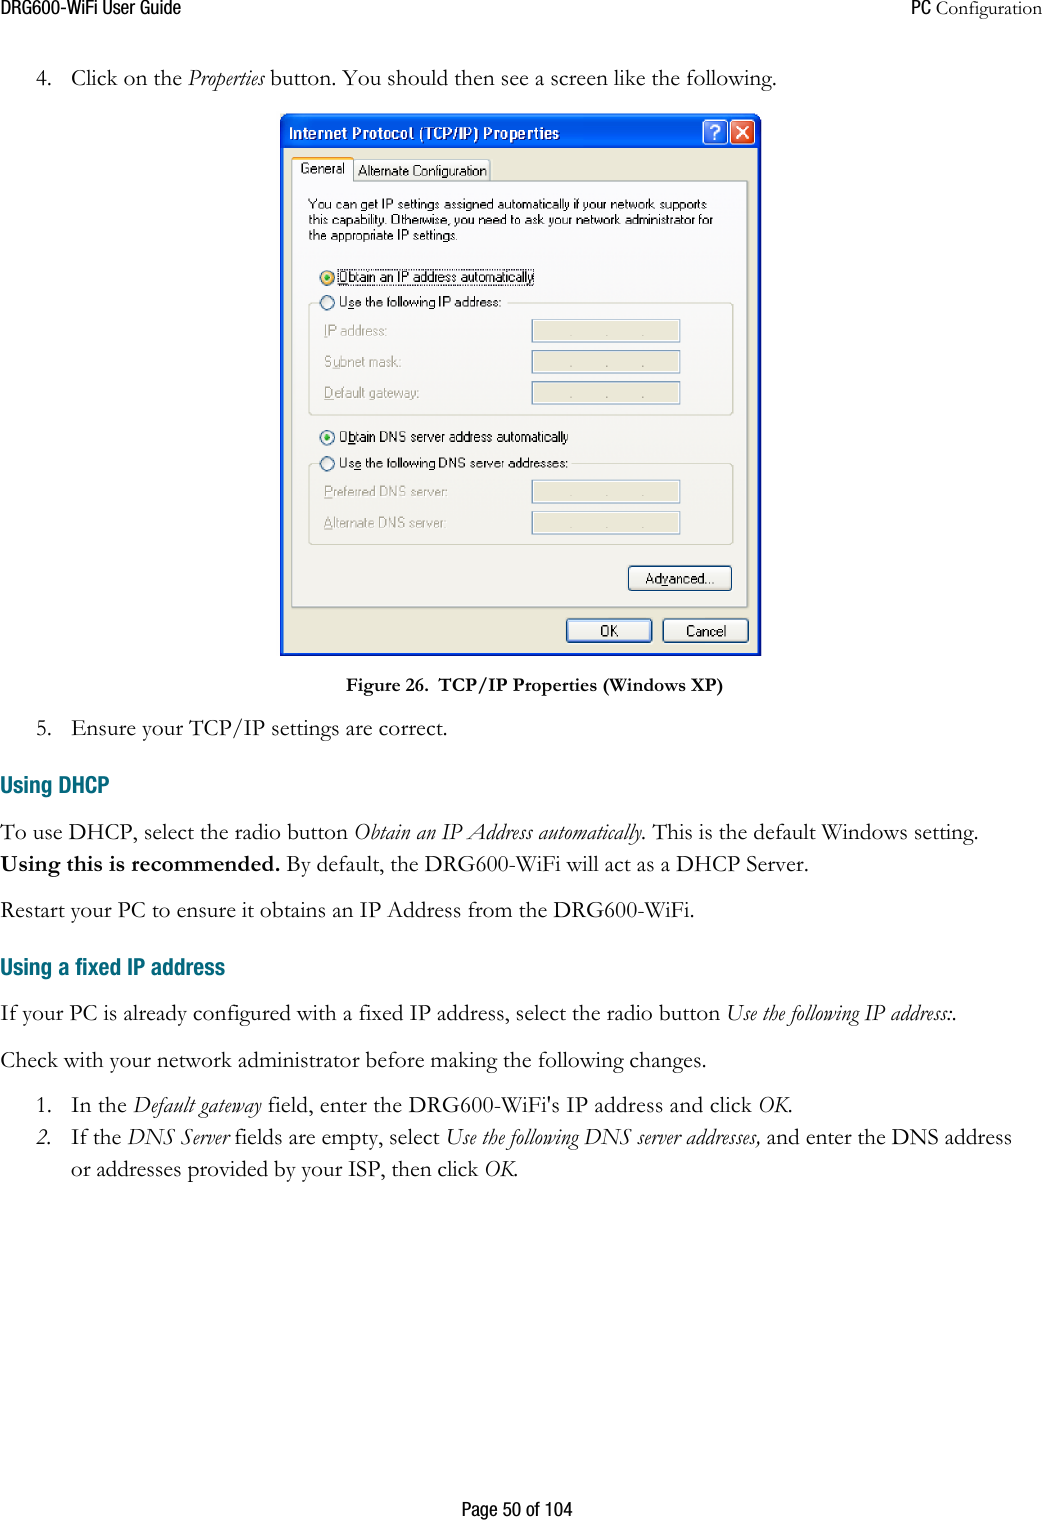 DRG600WiFi User Guide  PC Configuration  Page 50 of 104 4. Click on the Properties button. You should then see a screen like the following.  Figure 26. TCP/IP Properties (Windows XP)  5. Ensure your TCP/IP settings are correct. Using DHCP To use DHCP, select the radio button Obtain an IP Address automatically. This is the default Windows setting. Using this is recommended. By default, the DRG600-WiFi will act as a DHCP Server. Restart your PC to ensure it obtains an IP Address from the DRG600-WiFi.  Using a fixed IP address  If your PC is already configured with a fixed IP address, select the radio button Use the following IP address:.  Check with your network administrator before making the following changes. 1. In the Default gateway field, enter the DRG600-WiFi&apos;s IP address and click OK.  2. If the DNS Server fields are empty, select Use the following DNS server addresses, and enter the DNS address or addresses provided by your ISP, then click OK.   